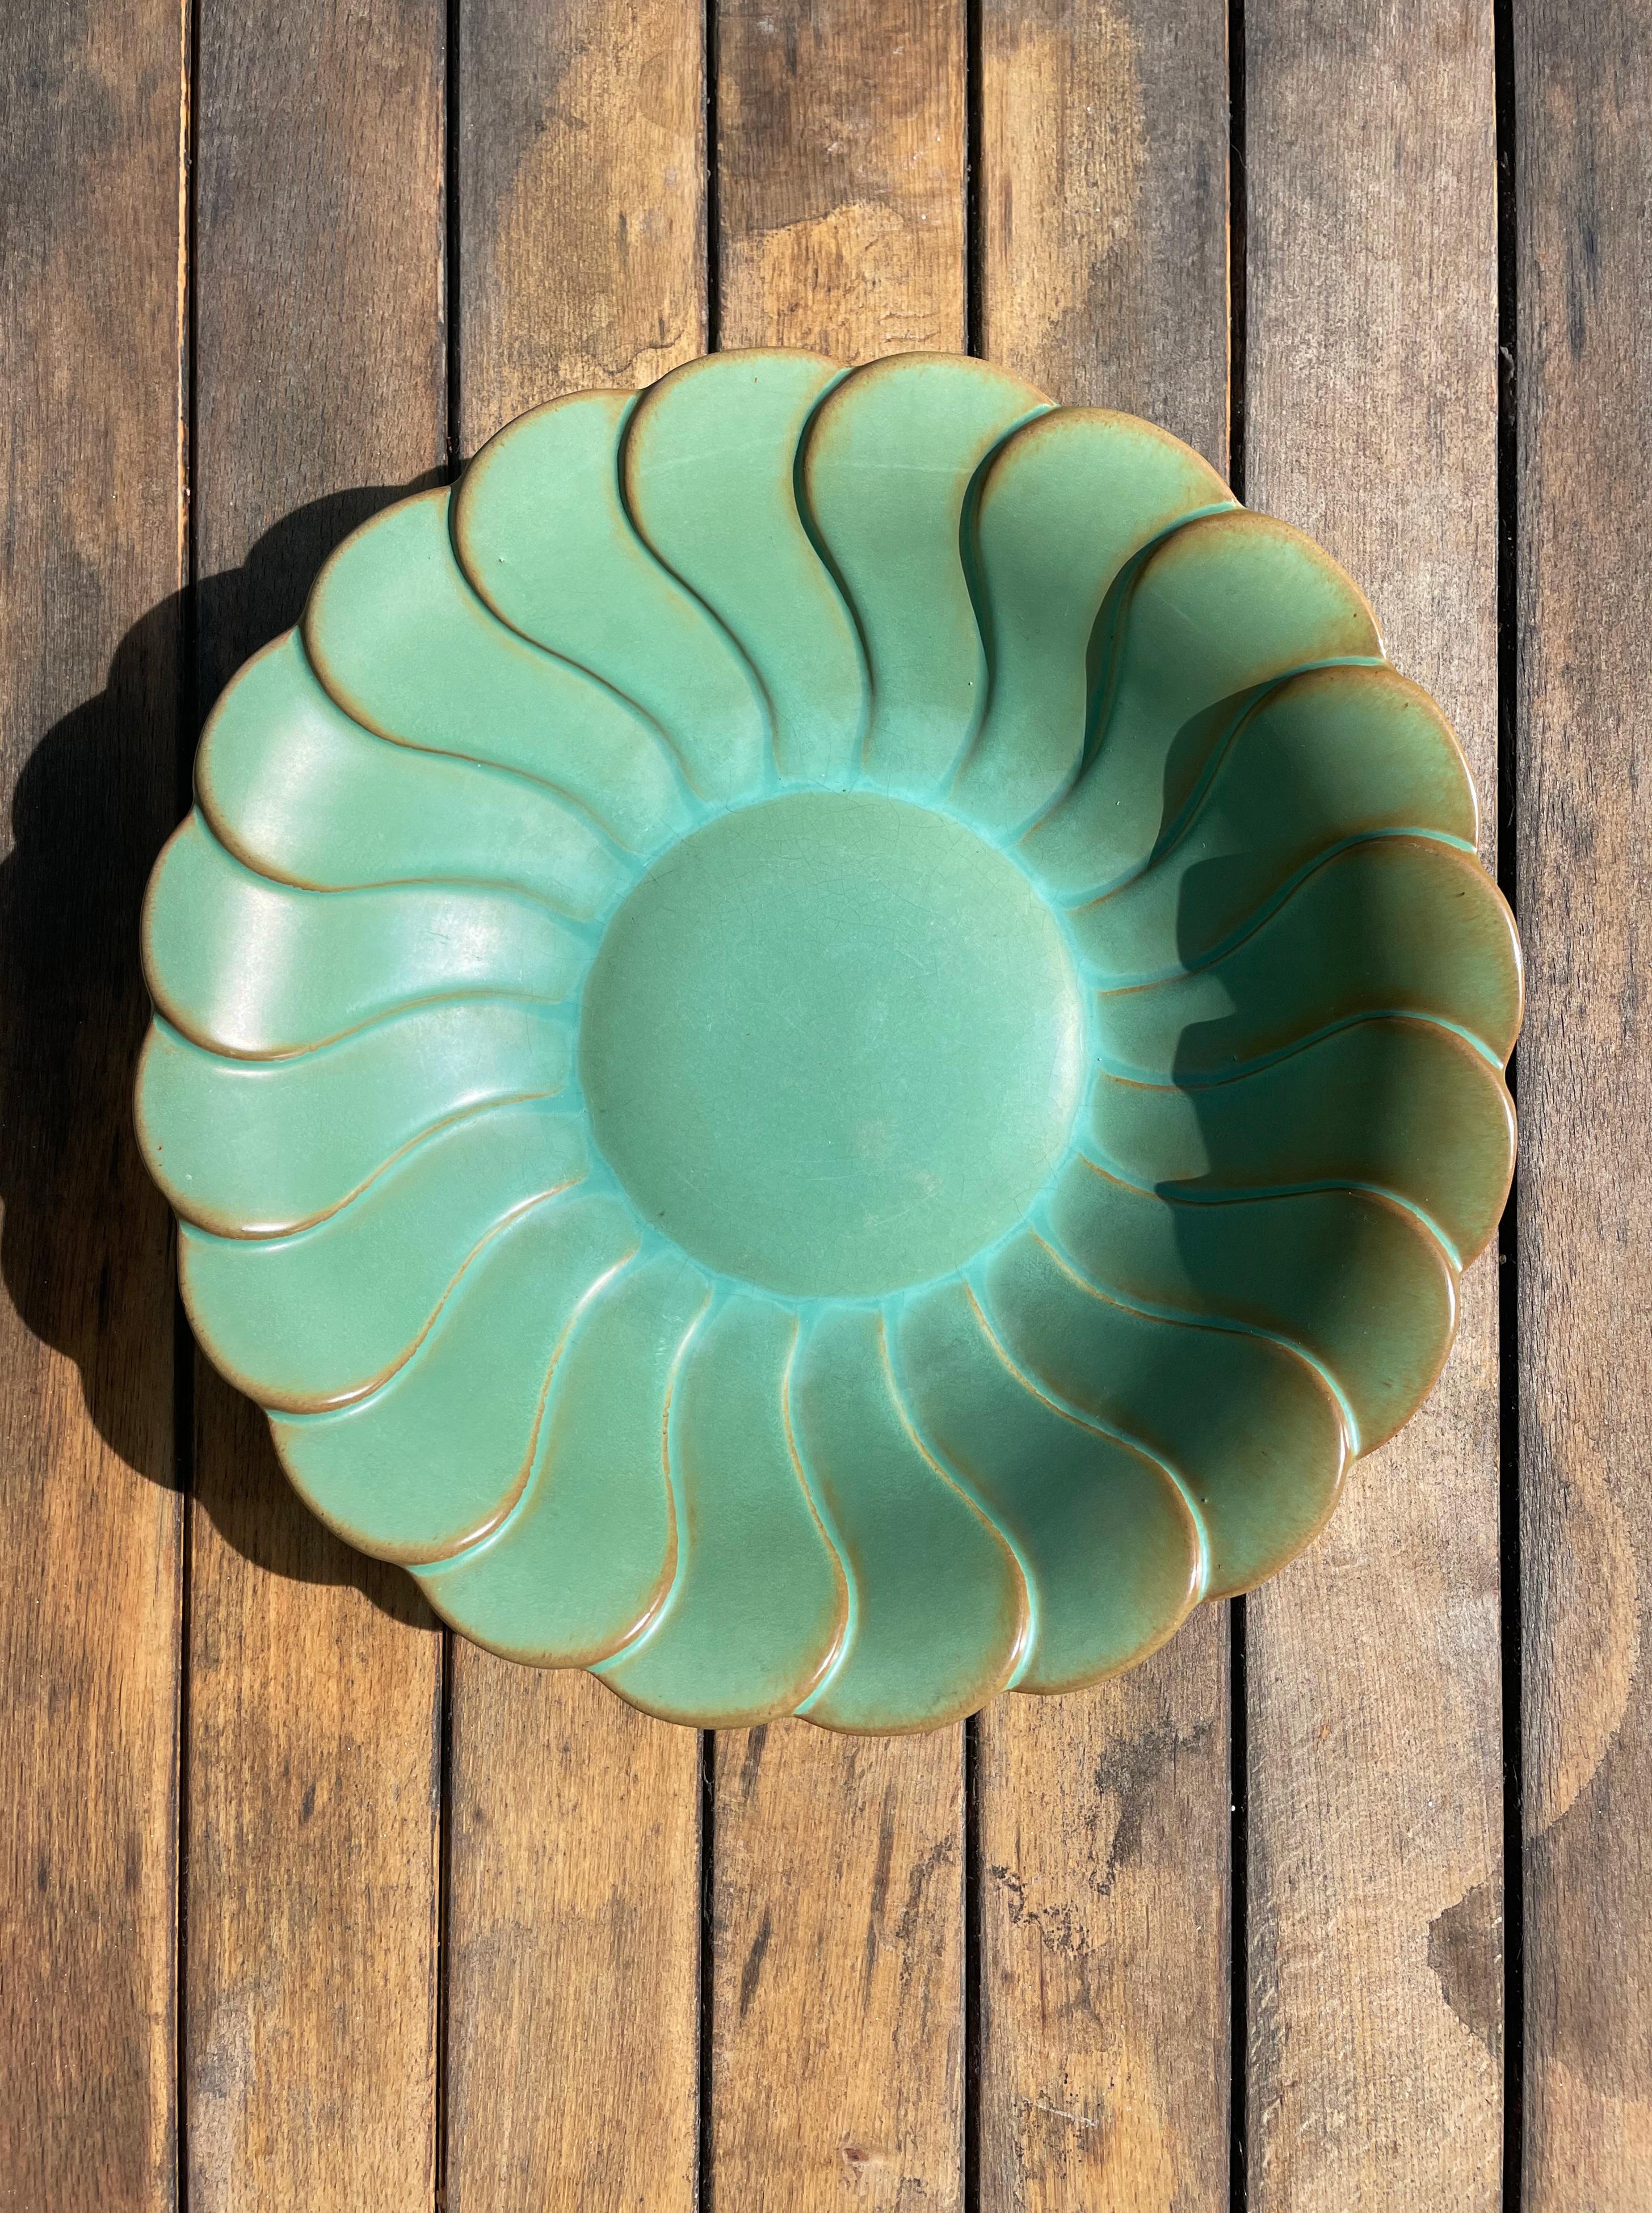 Dusty olive celadon green art deco faience sun-like bowl plate centerpiece by artist and designer Arthur Percy (1886-1976, student of Henri Matisse) for the Gefle porcelain factory in the 1930s. Organic fan shapes accentuated by golden bronze